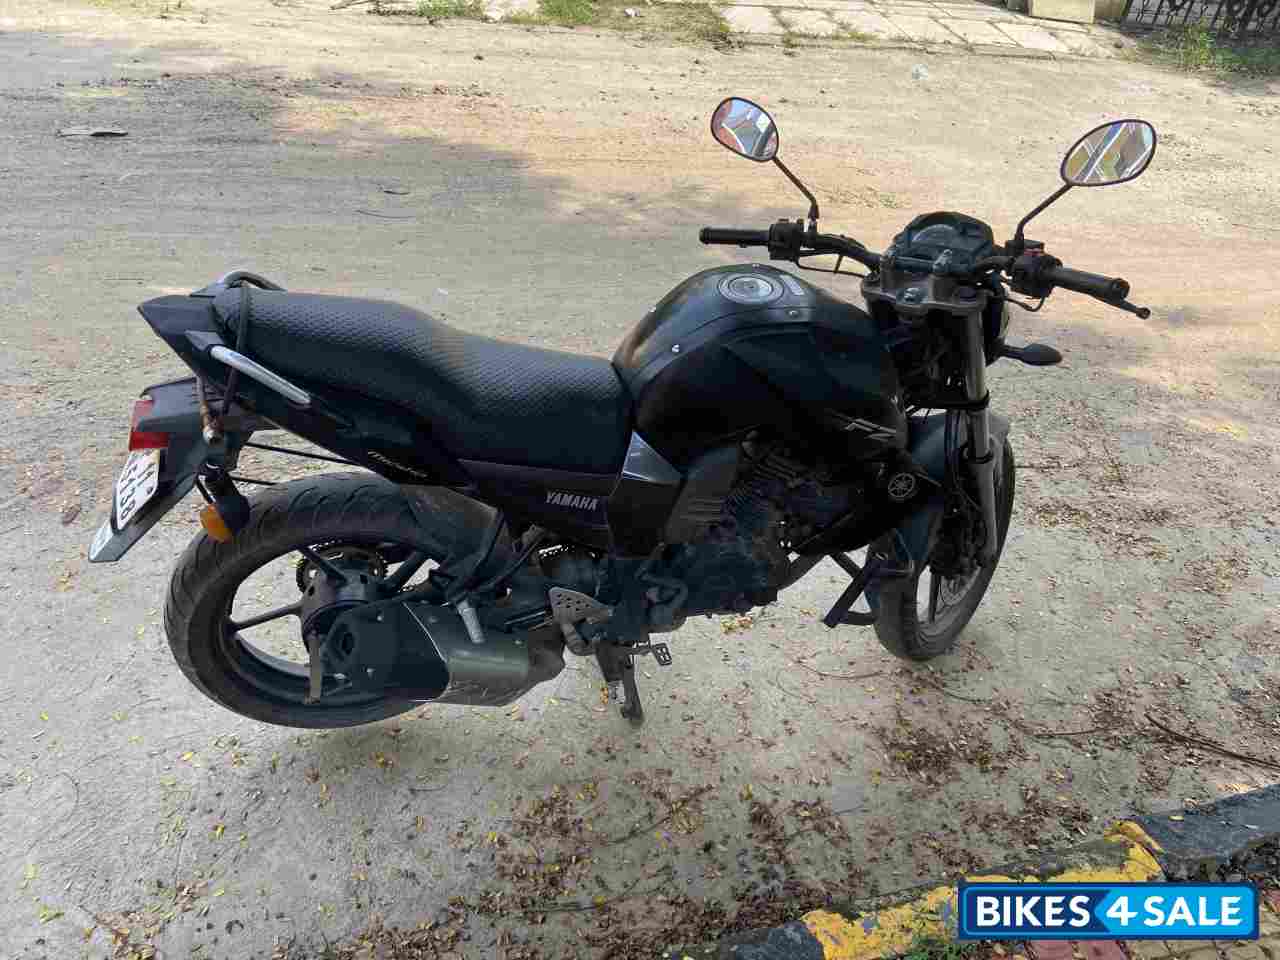 Used 2012 model Yamaha FZ16 for sale in Hyderabad. ID 293648 - Bikes4Sale